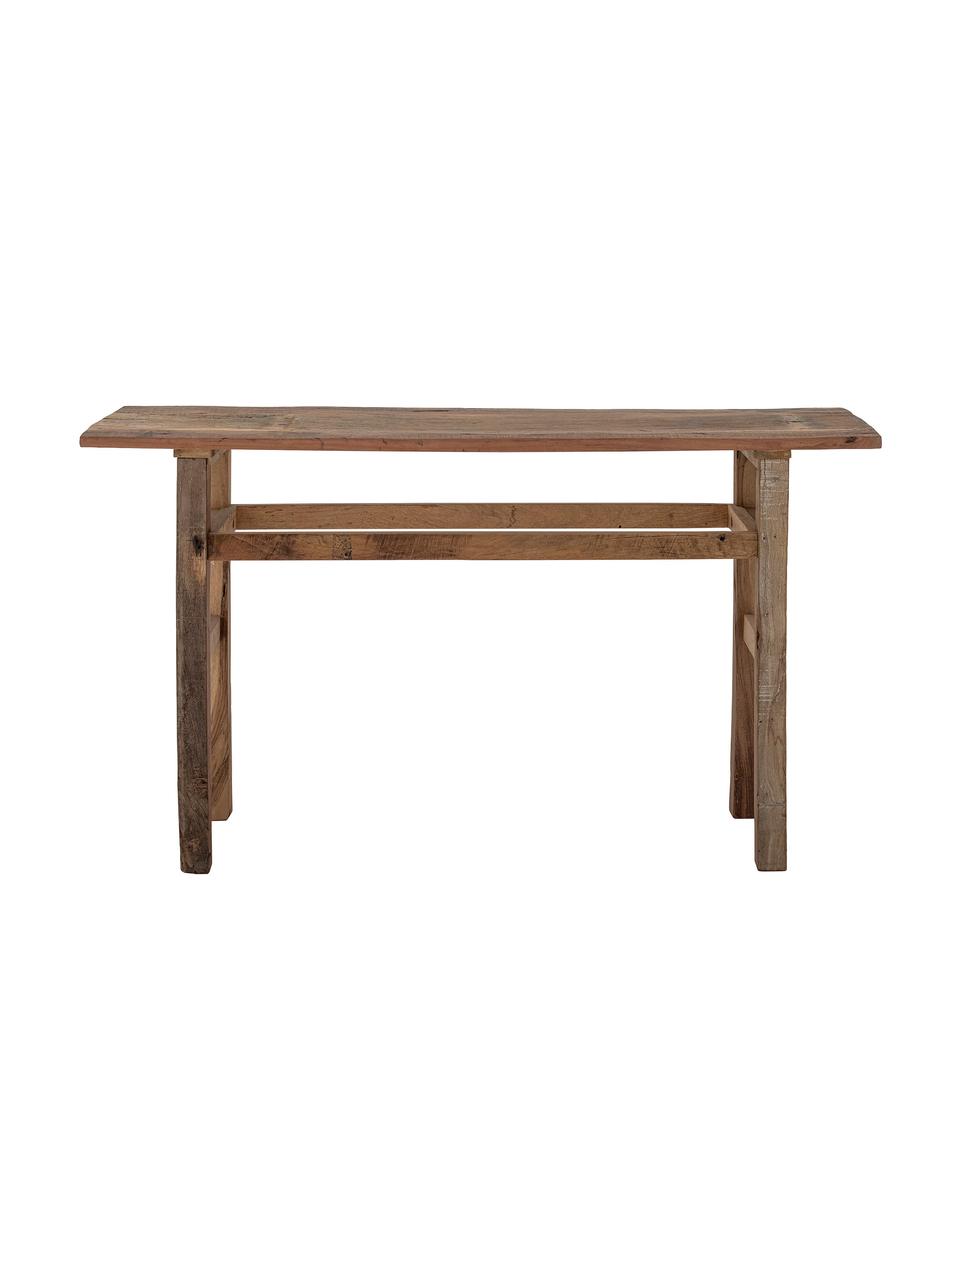 Wandtafel Bao van gerecycled hout, >30% gerecycled hout, Donkere hout, B 157 cm x H 87 cm